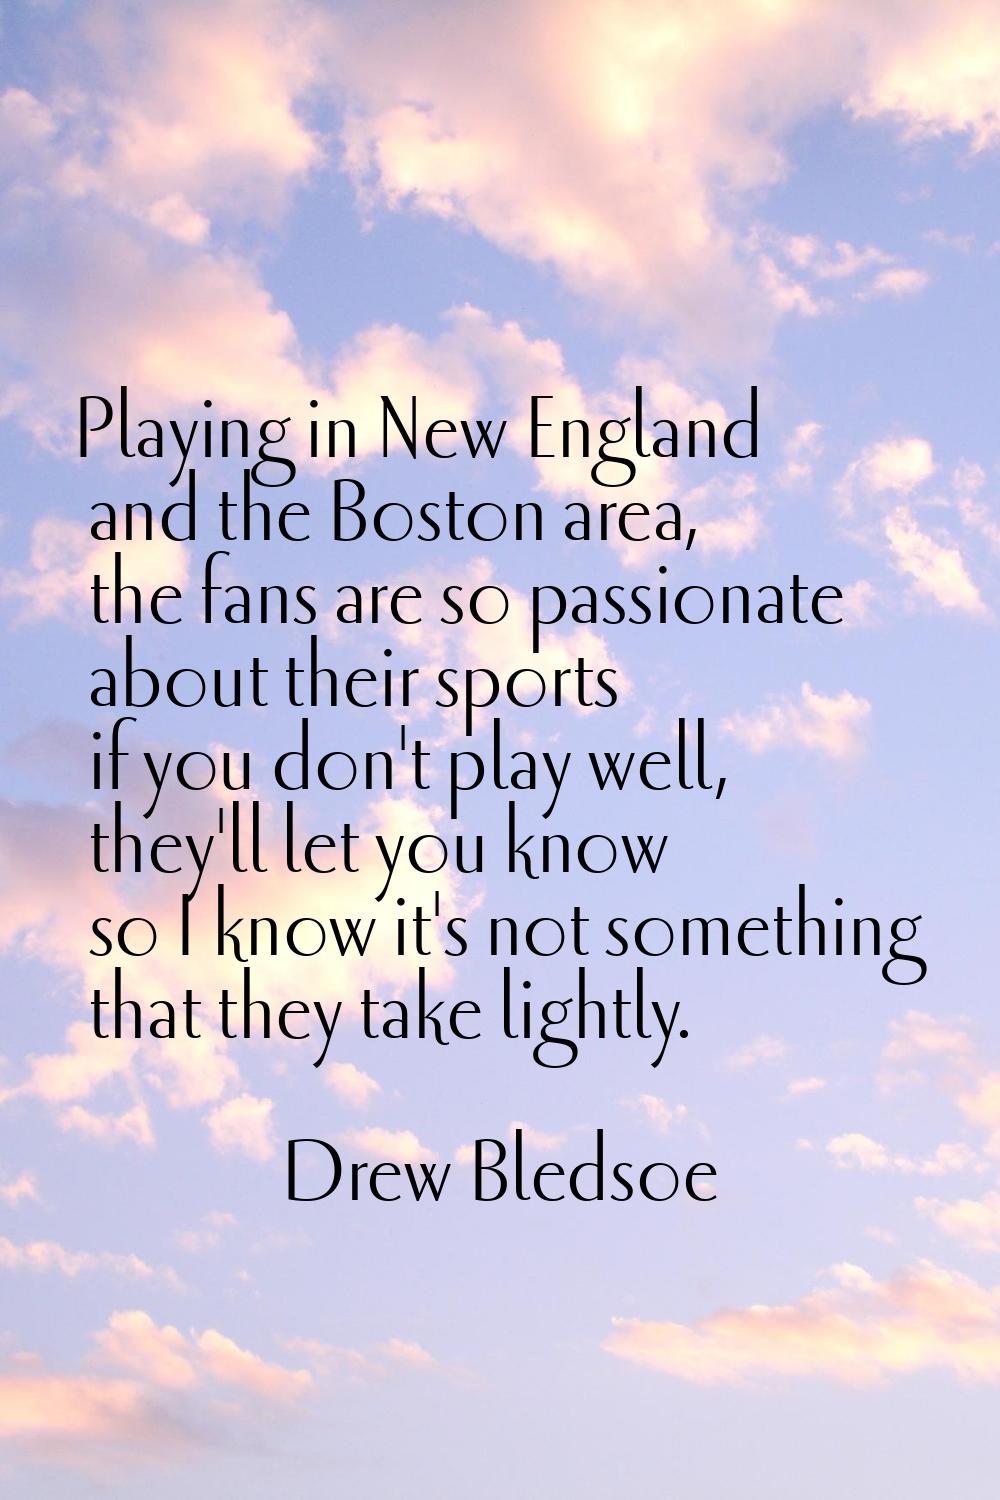 Playing in New England and the Boston area, the fans are so passionate about their sports if you do